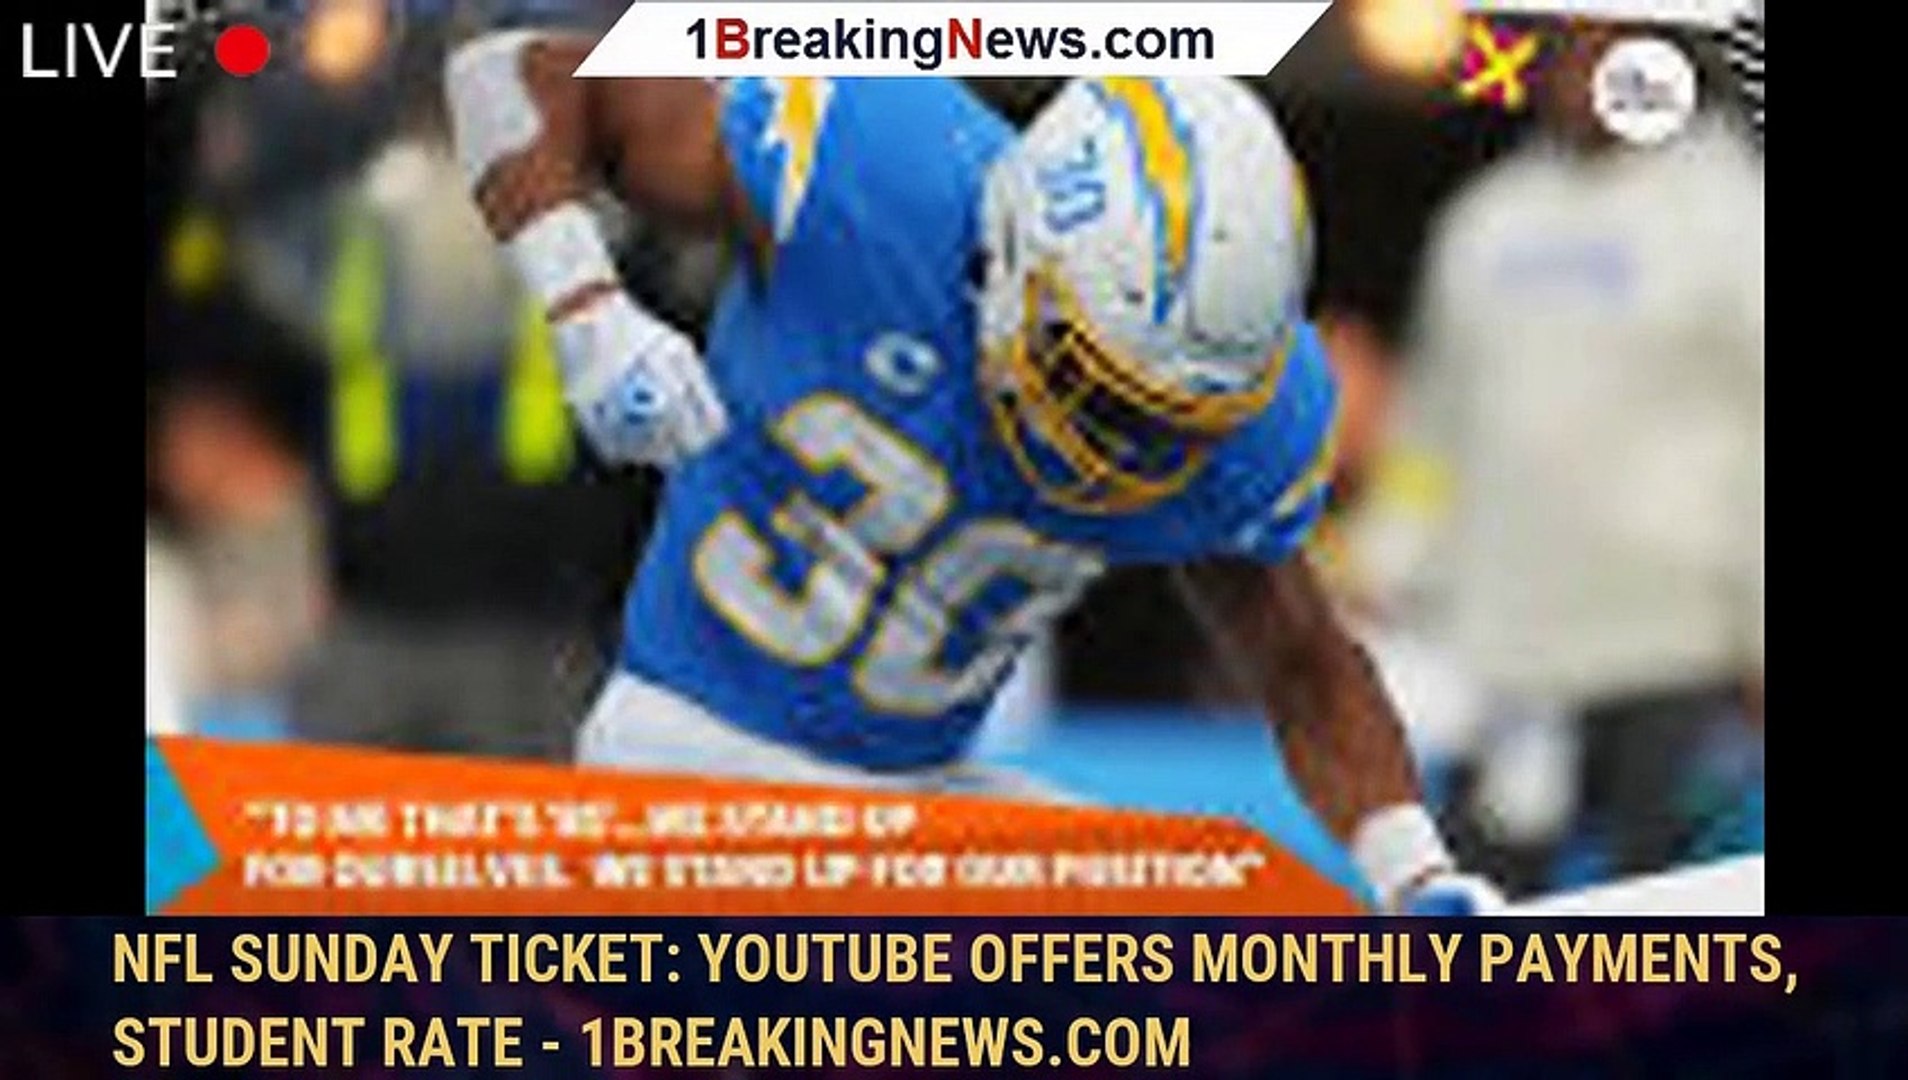 NFL Sunday Ticket: Offers Monthly Payments, Student Rate